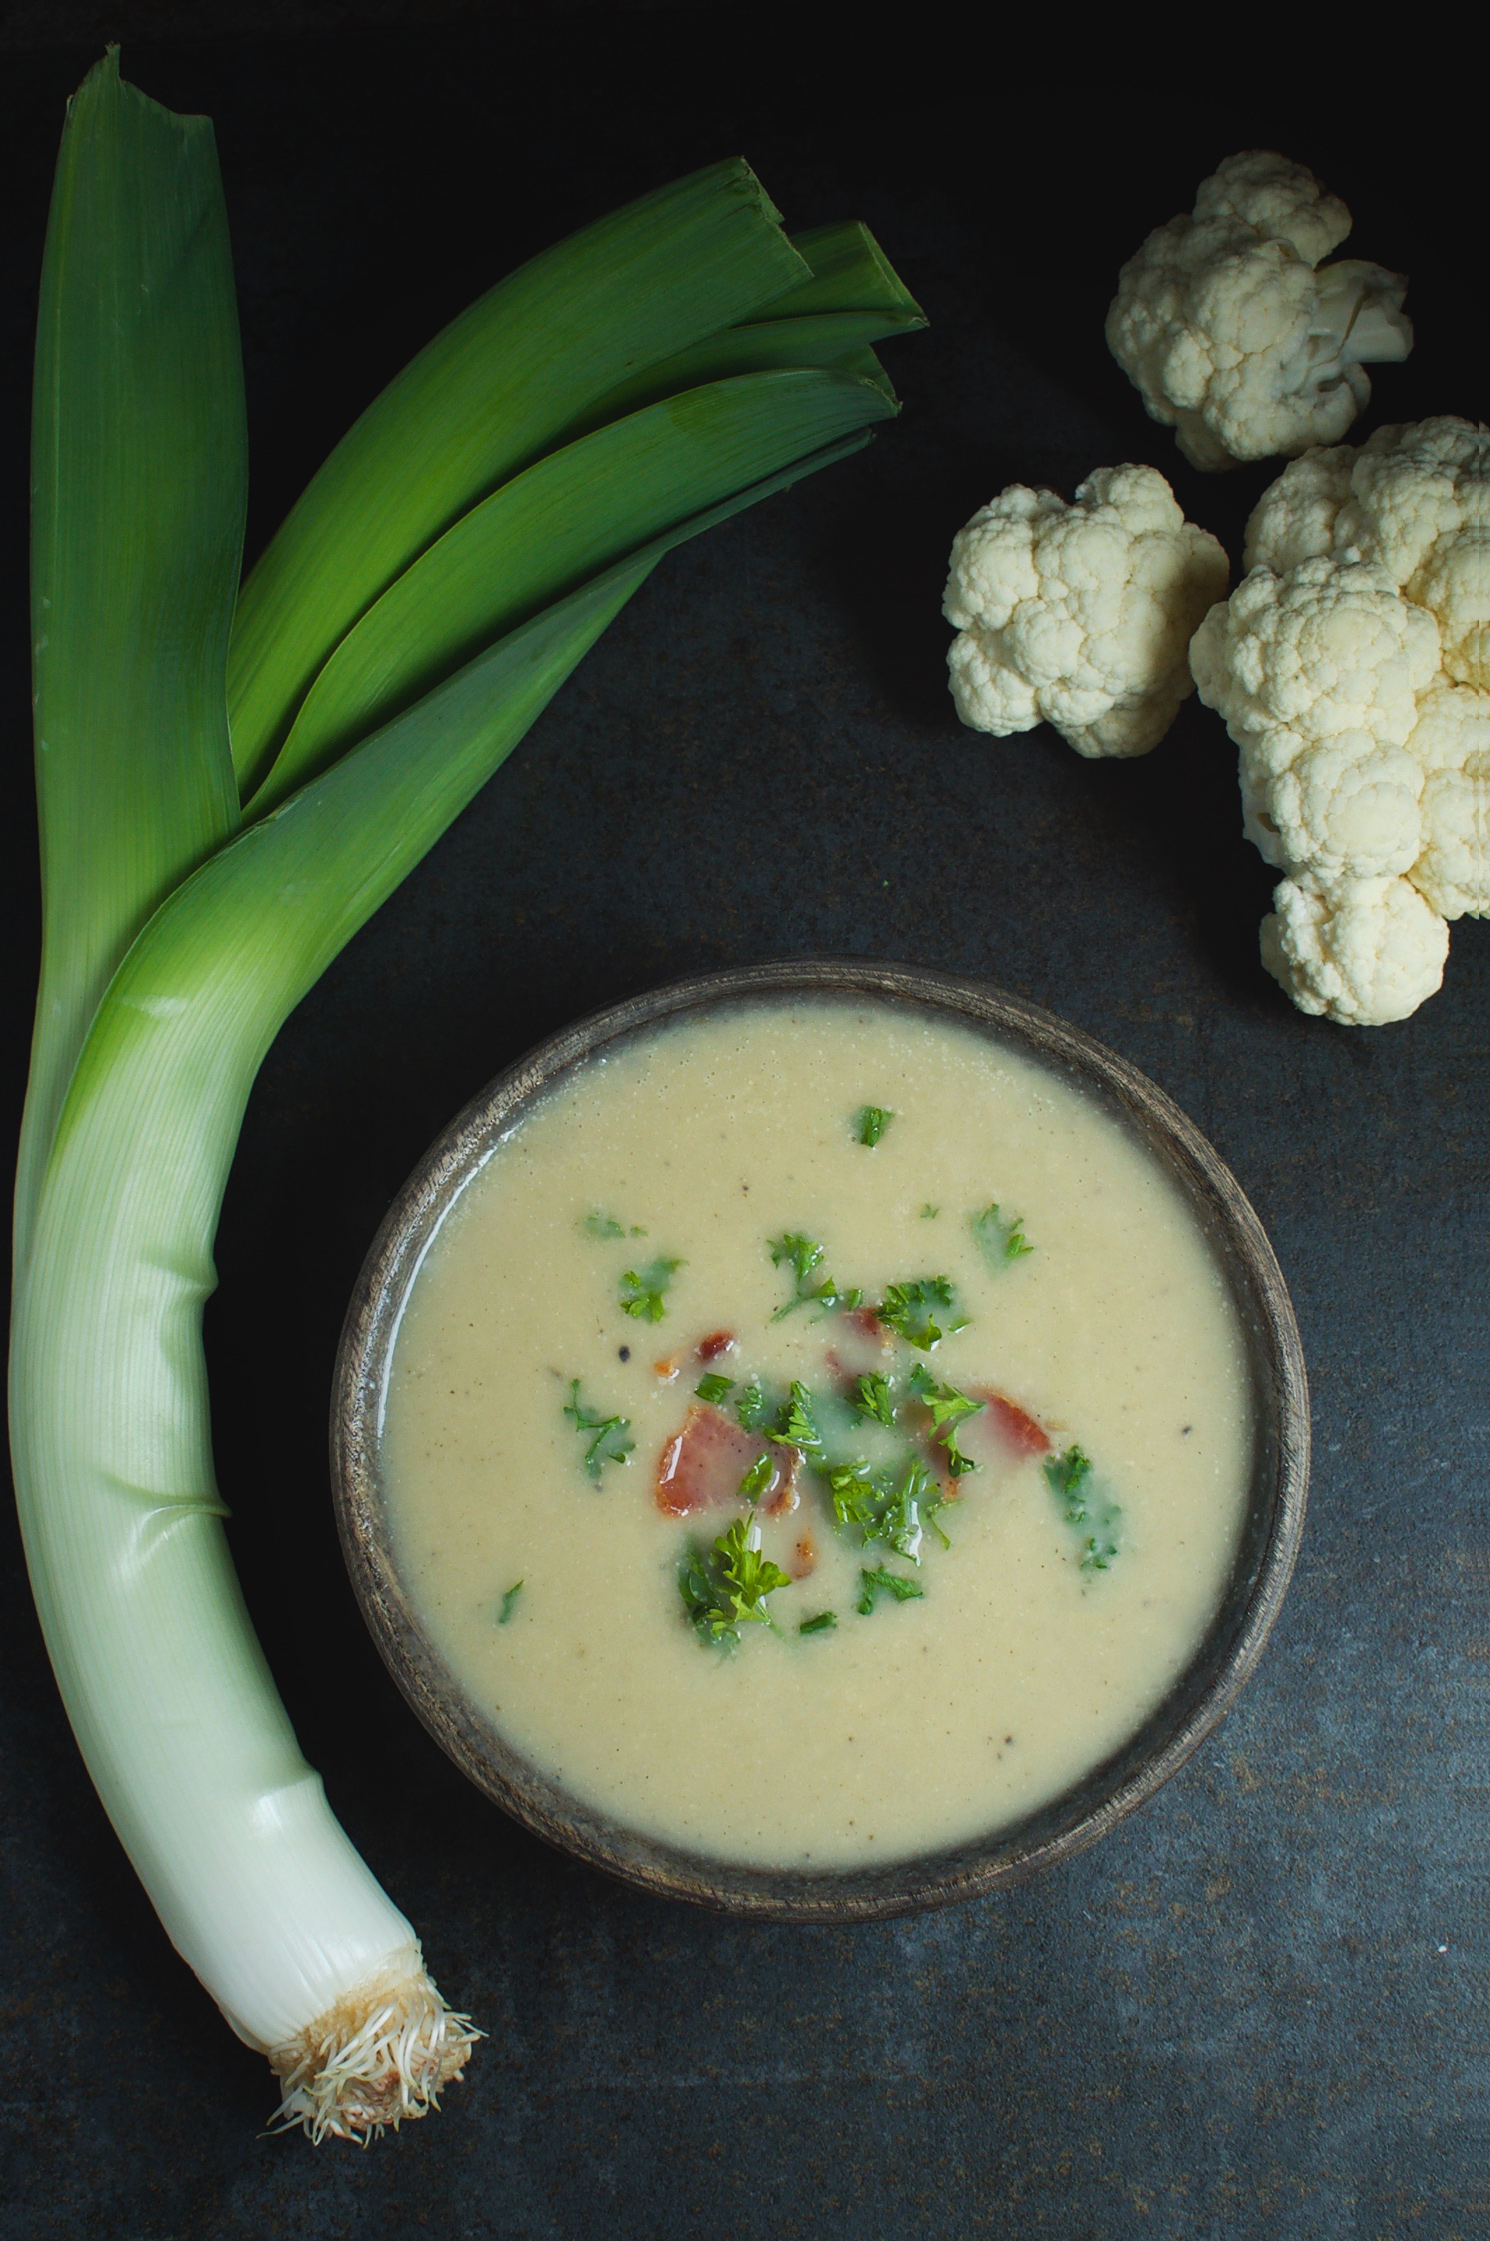 This Low-Carb "Potato" Leek Soup is a Paleo, low-carb, and dairy-free comfort food. No one will know this soup is made with cauliflower and not potatoes.